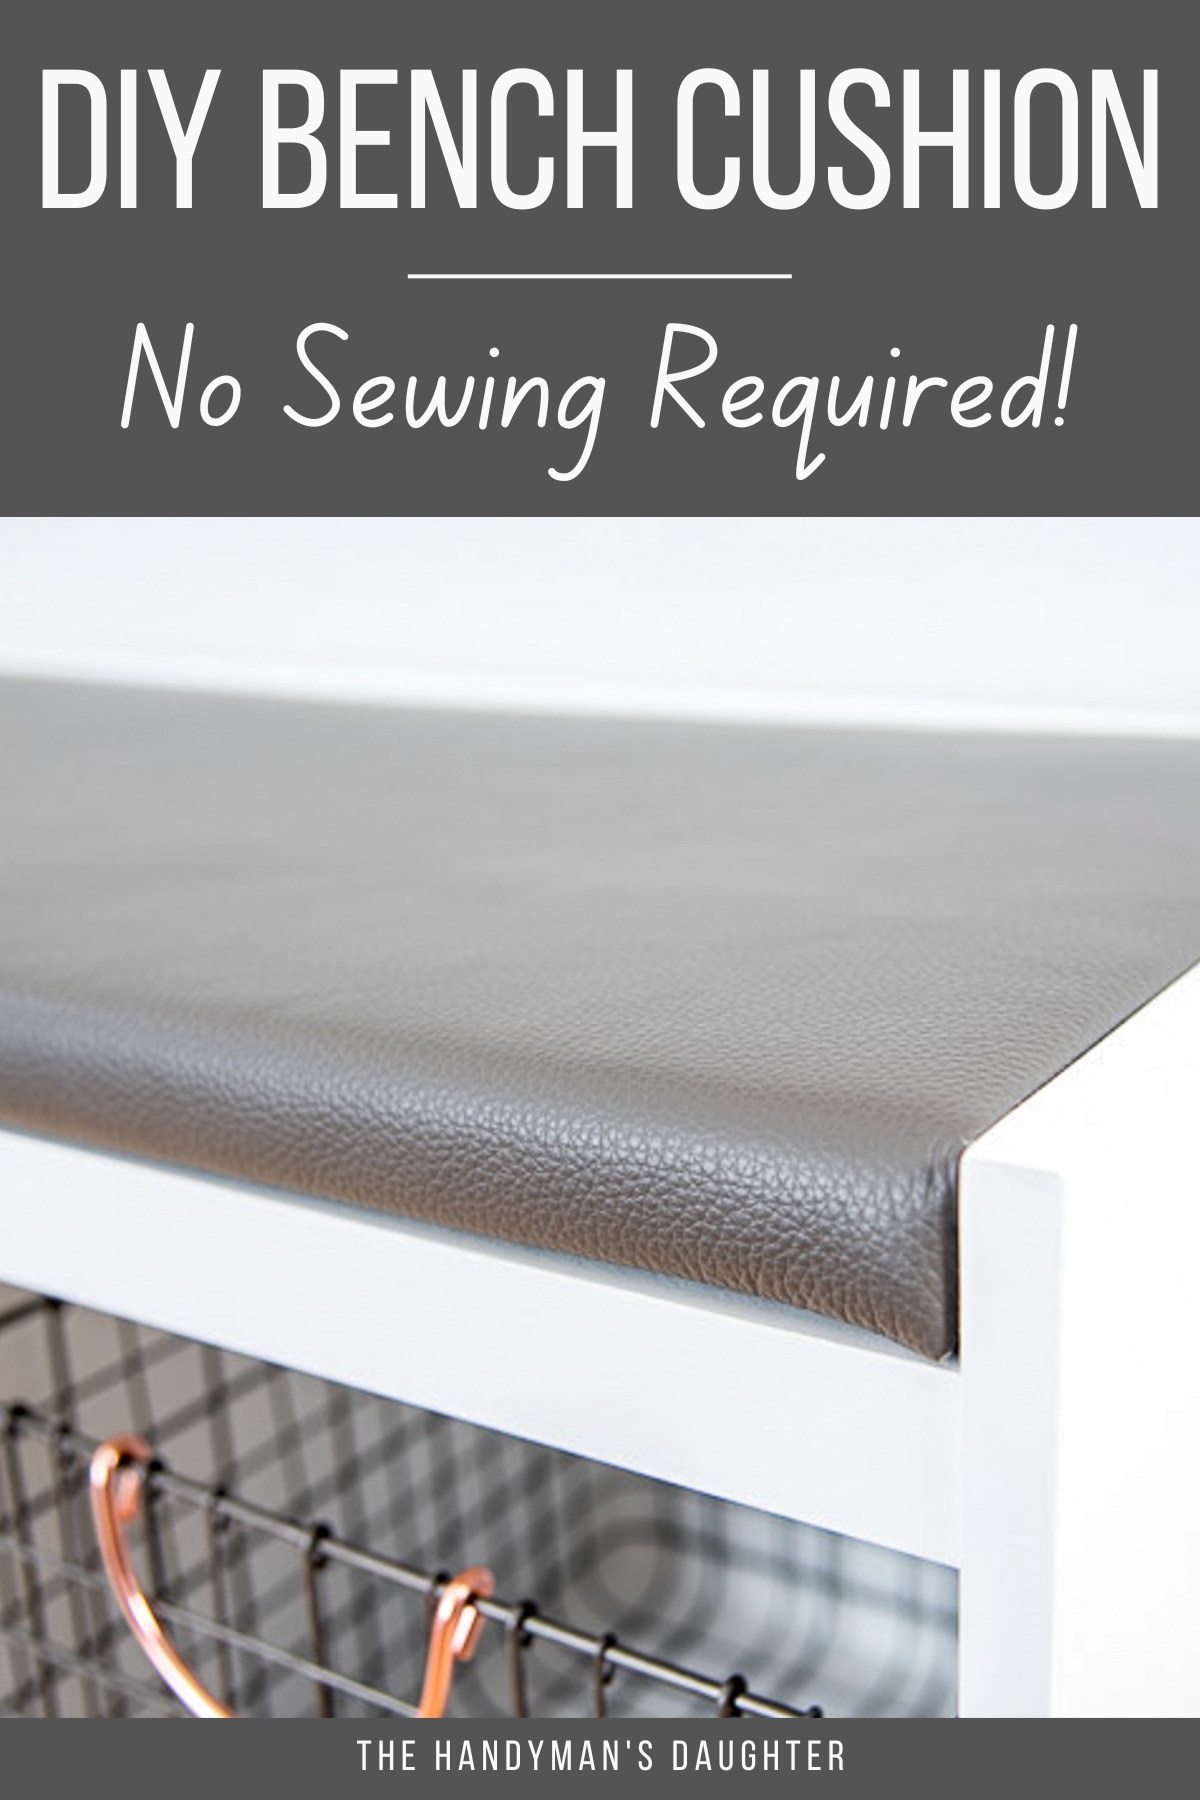 DIY bench cushion - no sewing required!